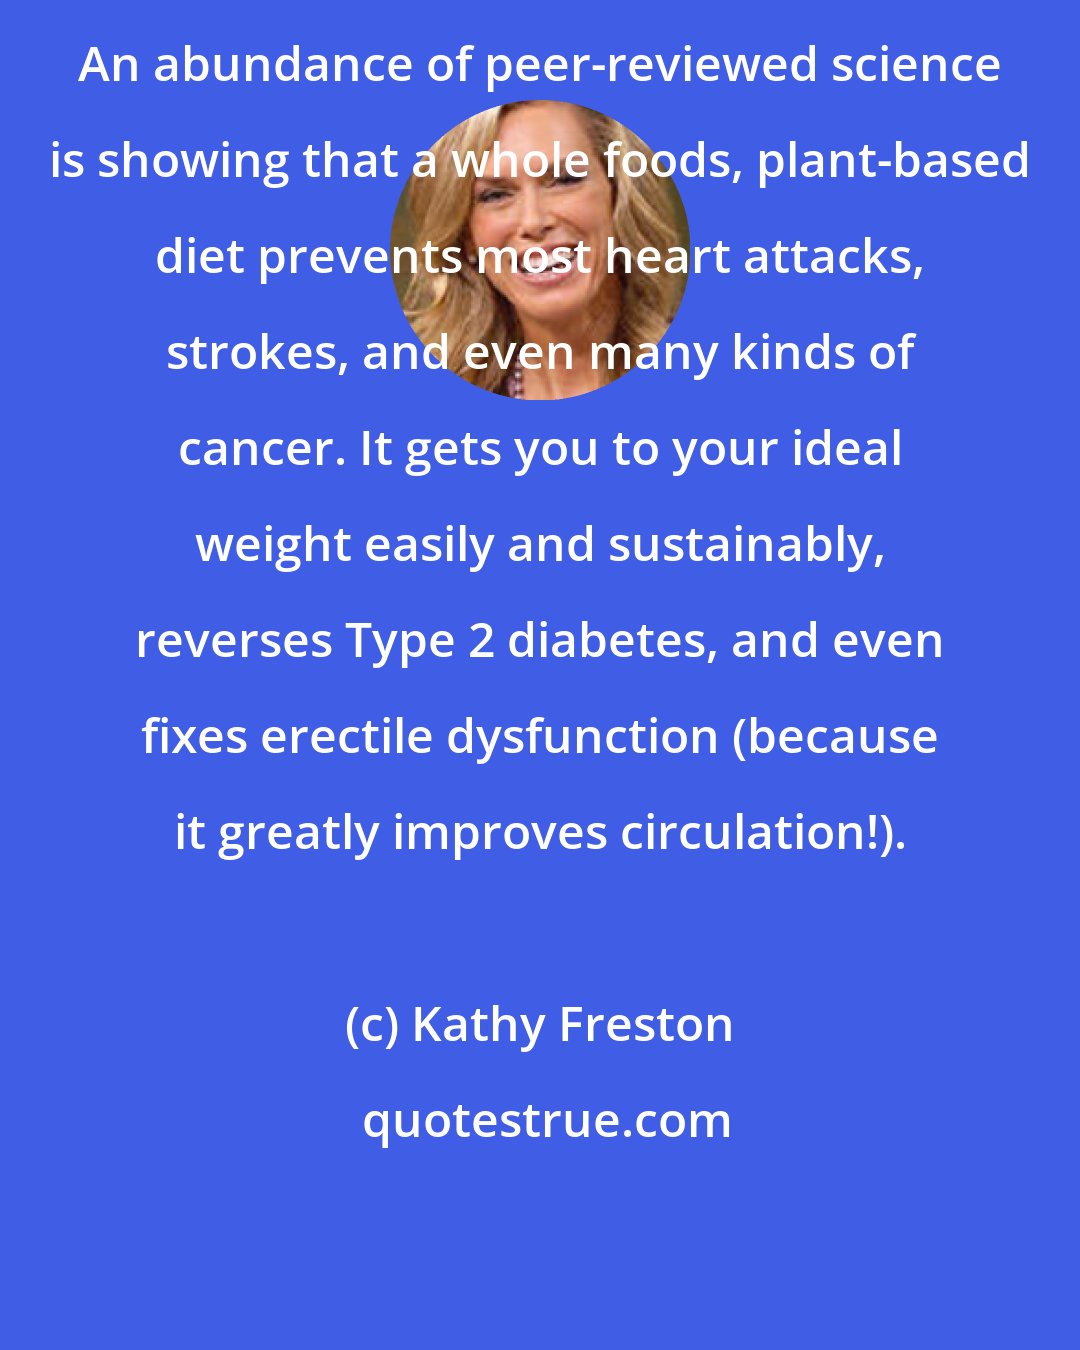 Kathy Freston: An abundance of peer-reviewed science is showing that a whole foods, plant-based diet prevents most heart attacks, strokes, and even many kinds of cancer. It gets you to your ideal weight easily and sustainably, reverses Type 2 diabetes, and even fixes erectile dysfunction (because it greatly improves circulation!).